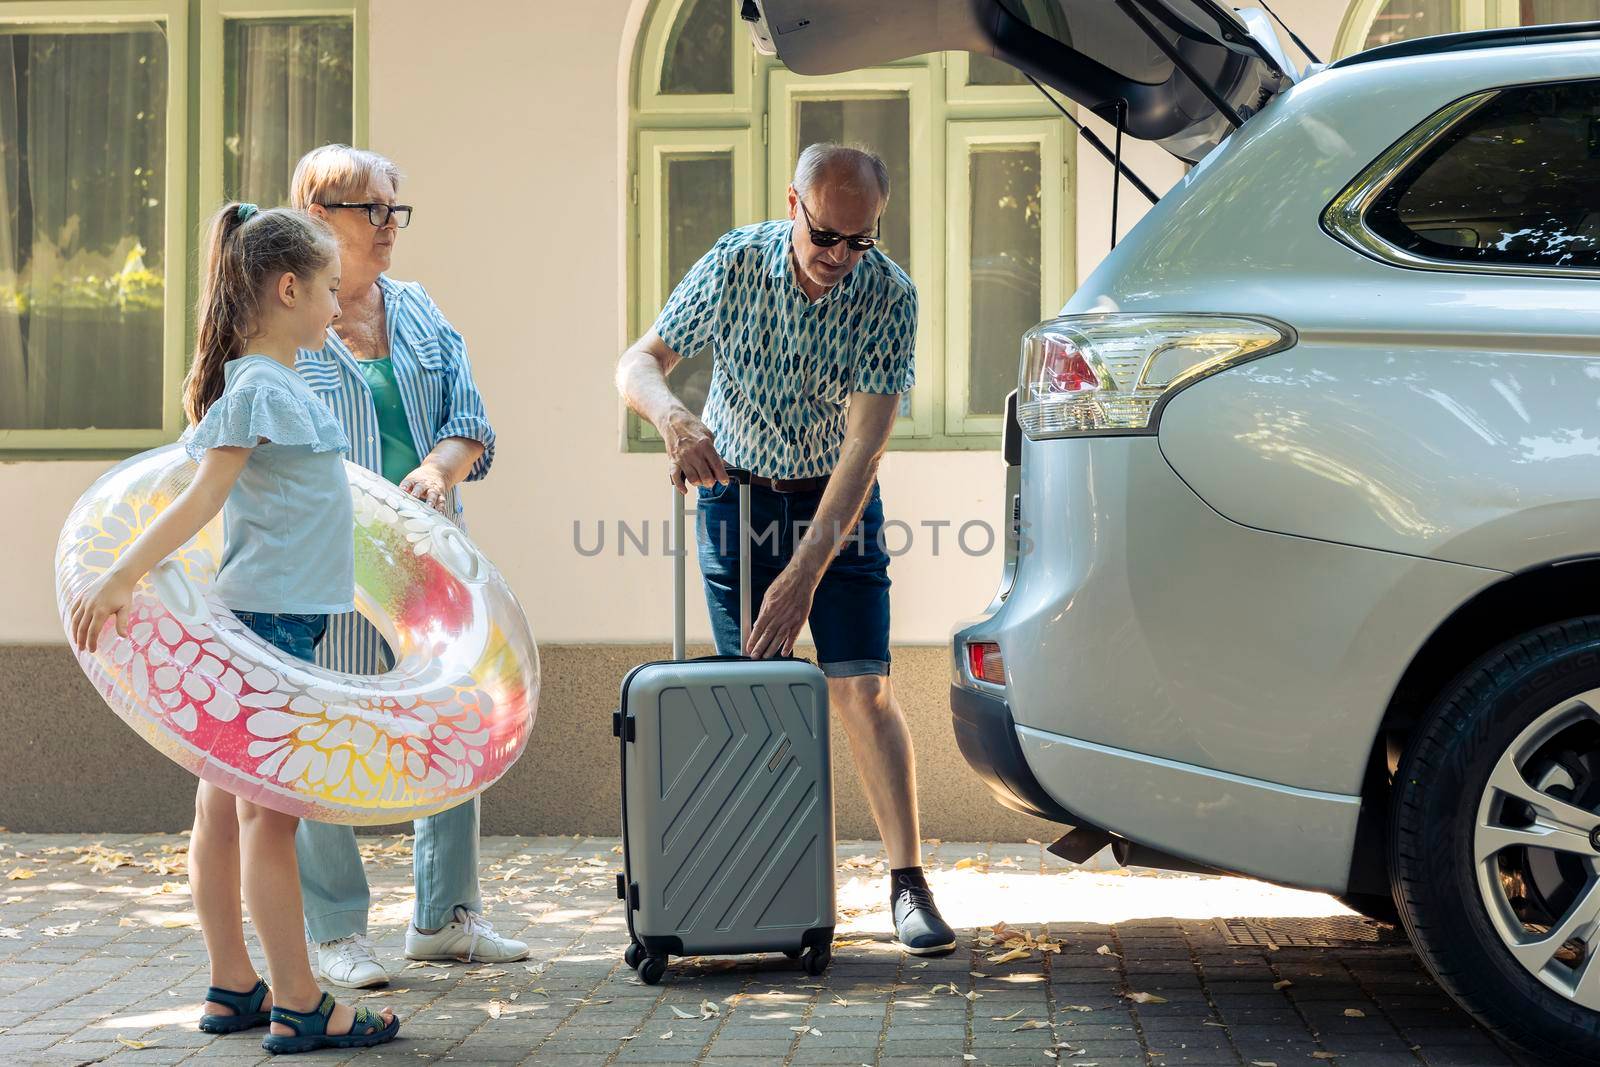 Elderly couple and niece loading baggage in trunk of automobile to leave on holiday road trip. Grandparents taking small child to seaside destination with luggage and inflatable during summer.